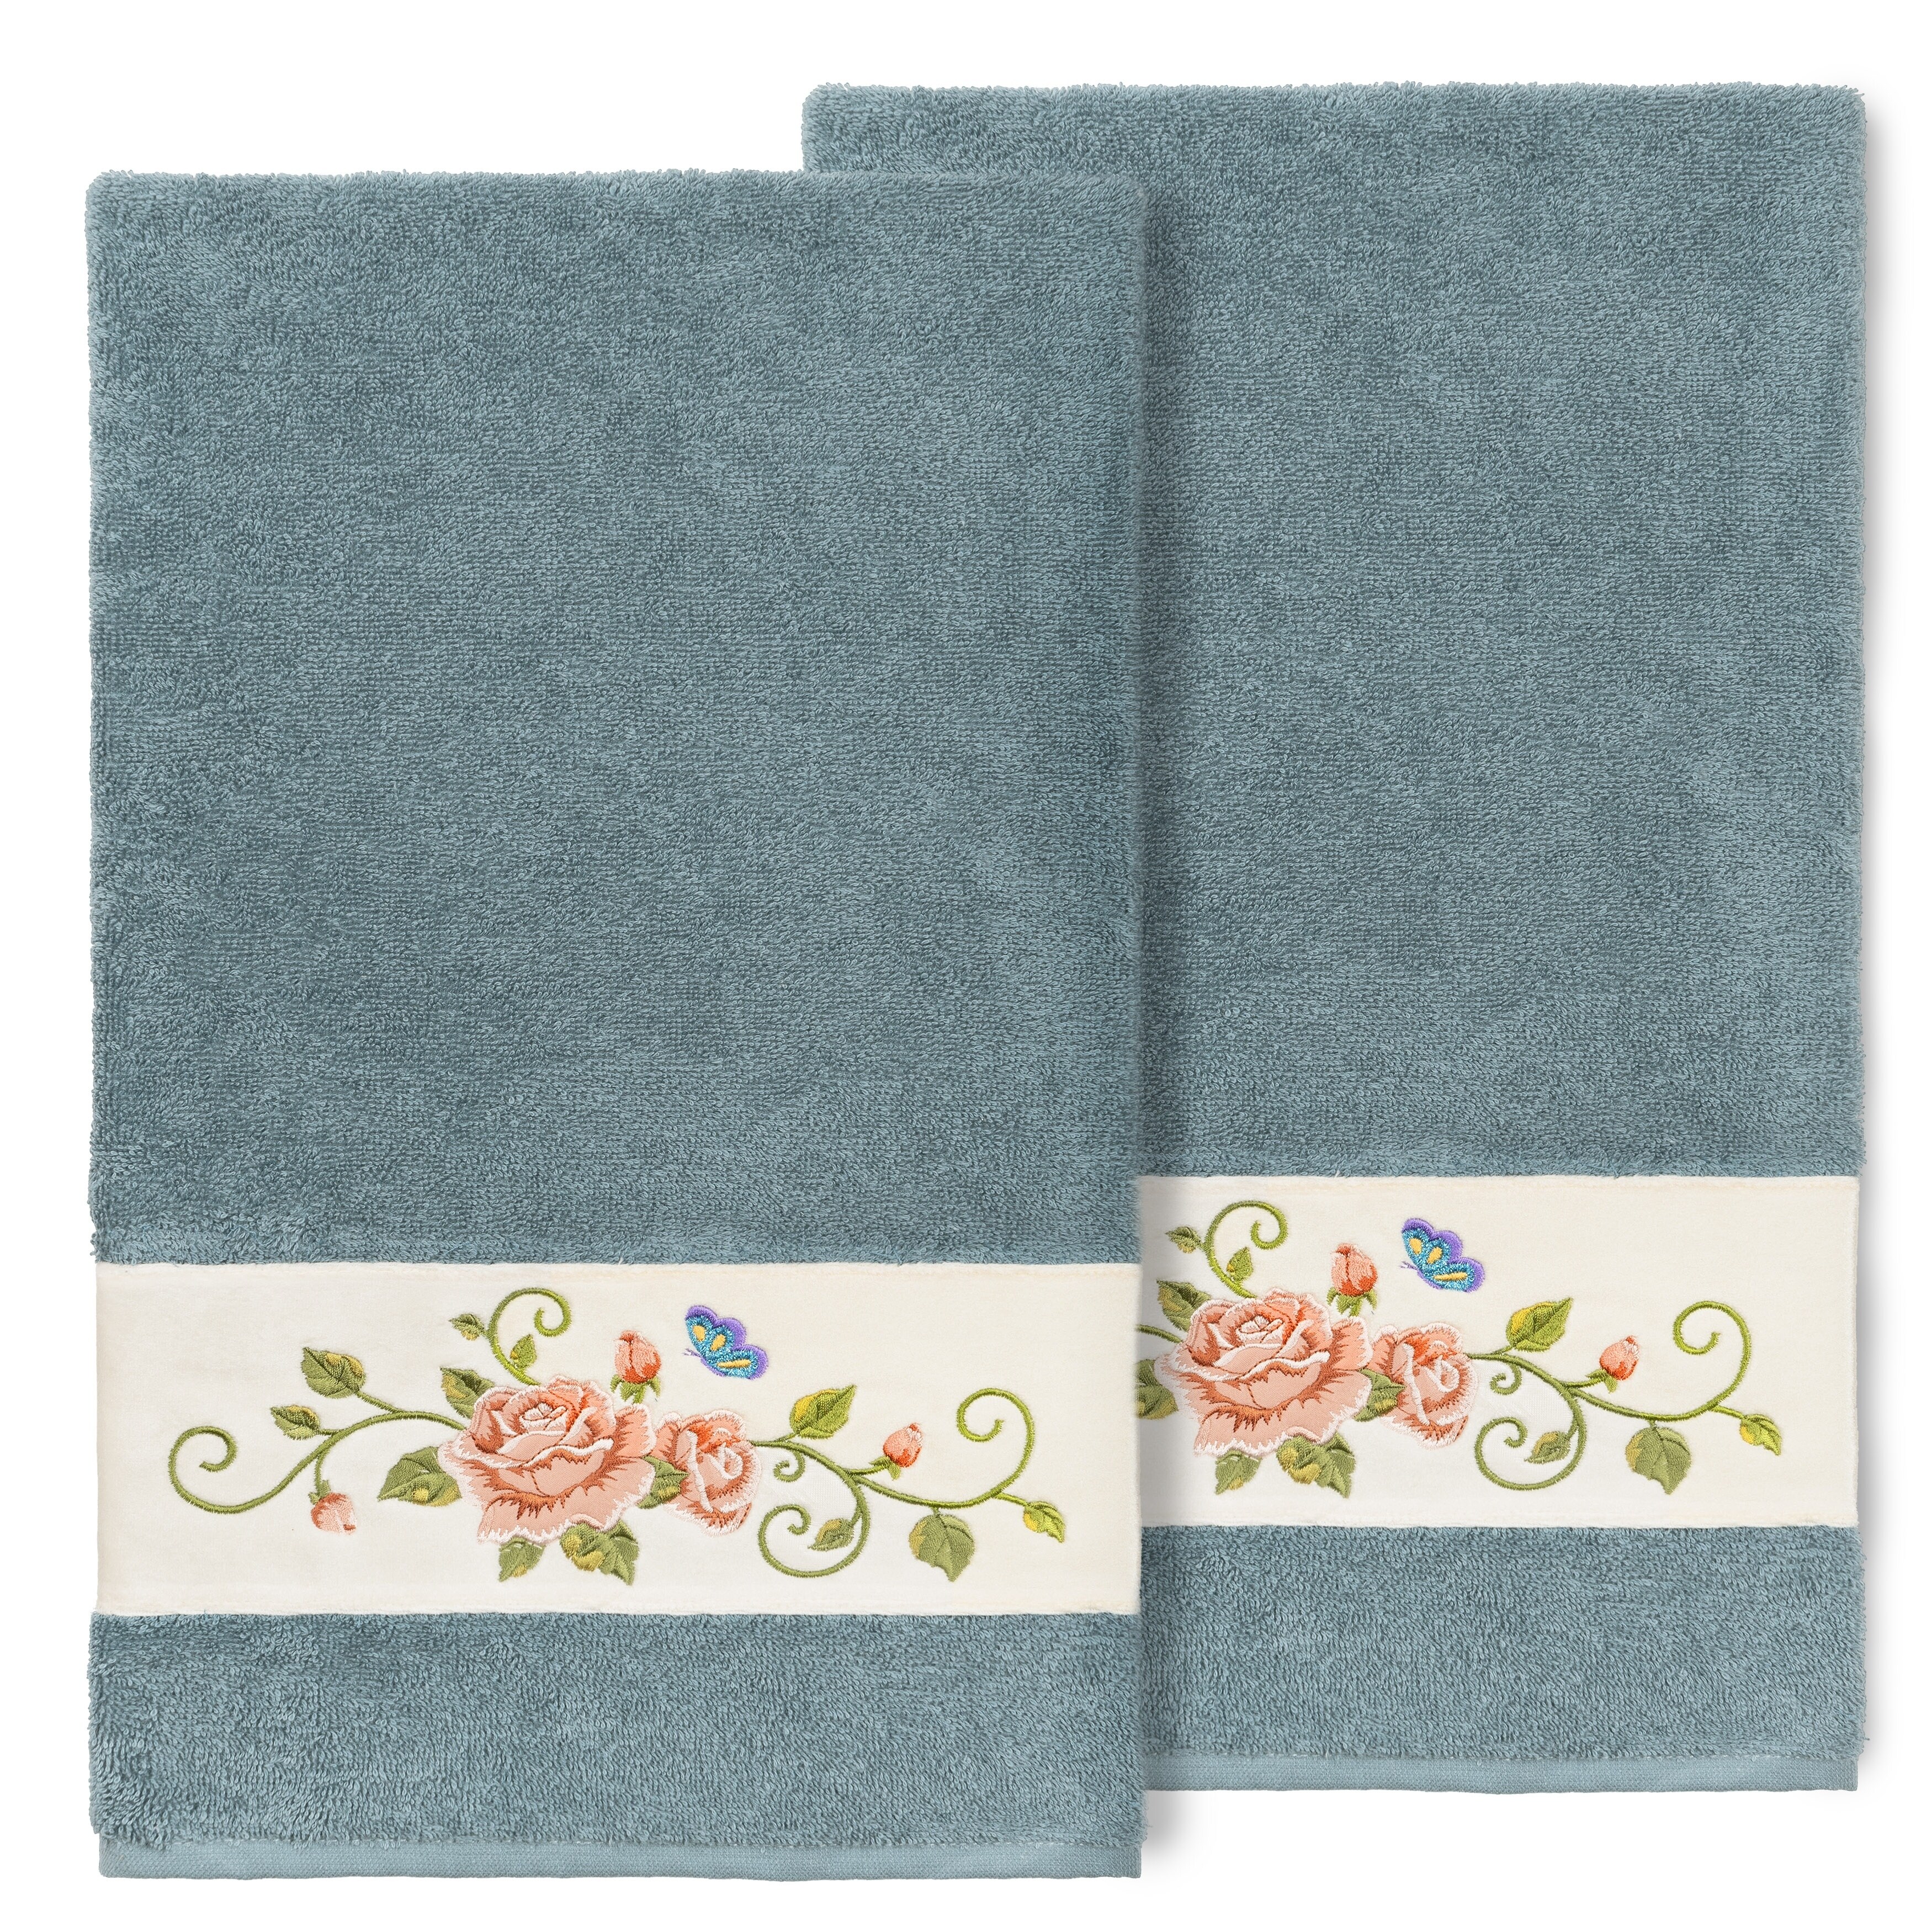 https://ak1.ostkcdn.com/images/products/28728162/Authentic-Hotel-and-Spa-100-Turkish-Cotton-Rebecca-2PC-Embellished-Bath-Towel-Set-ca175aa1-b07d-4de9-b4c2-6559aaa61e8c.jpg